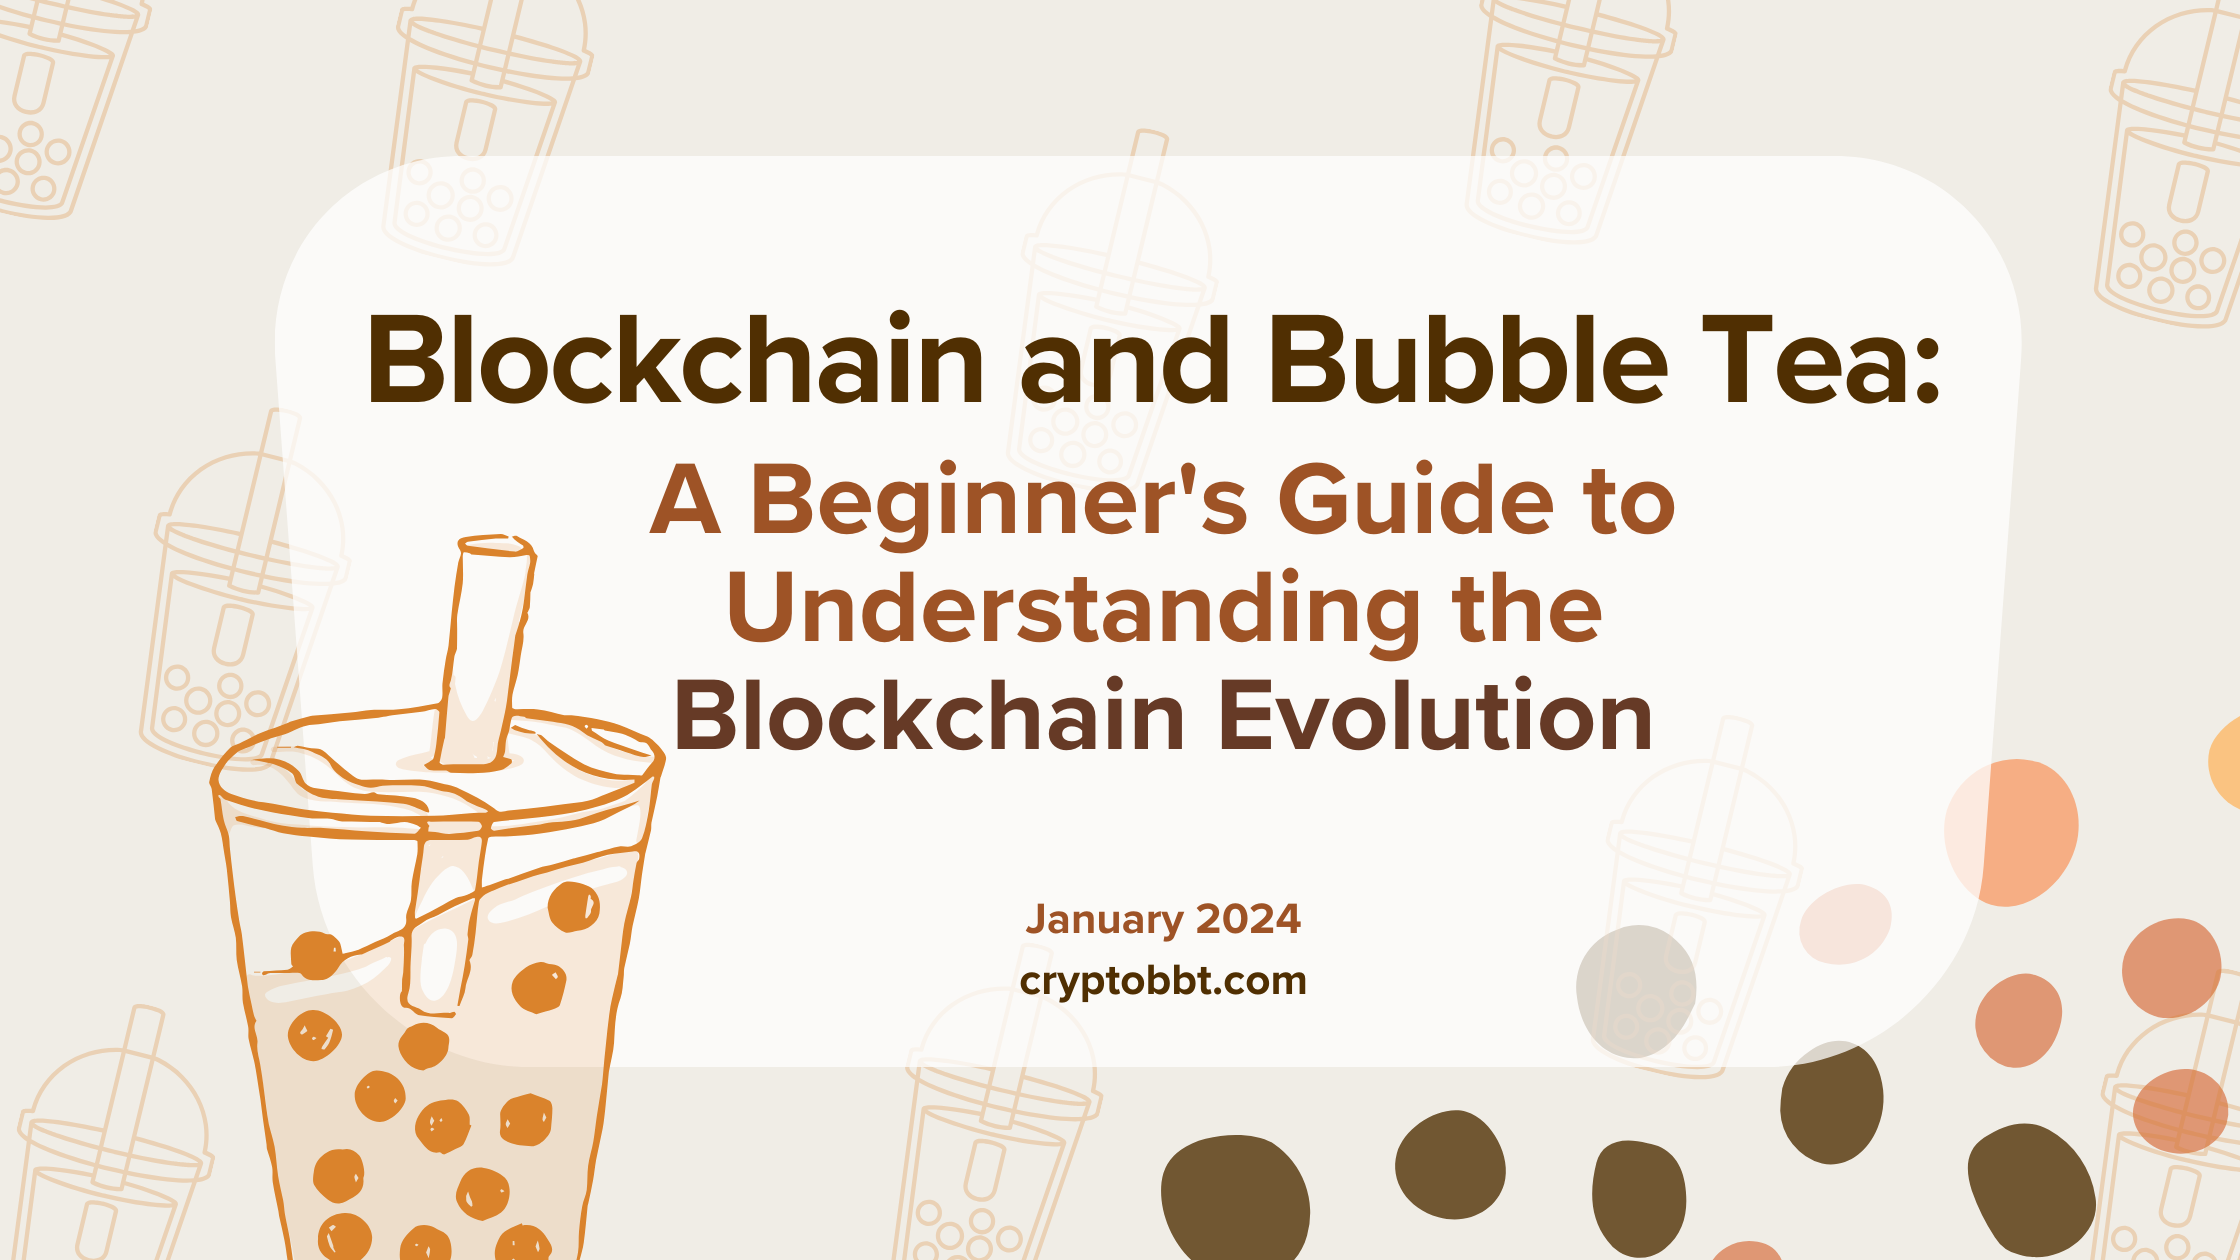 A beginners' guide to the Blockchain Evolution, bubble tea,